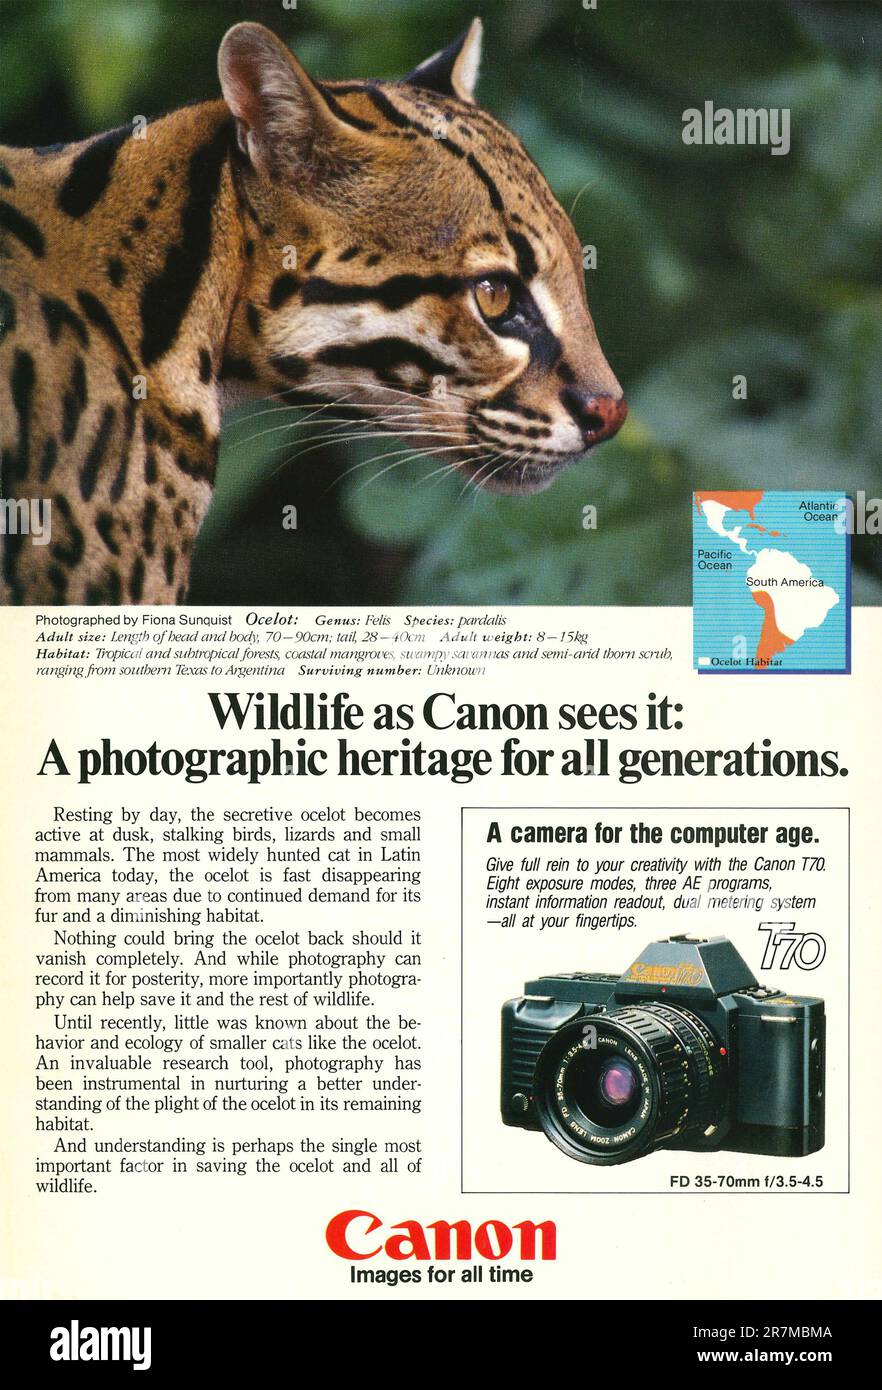 Canon T70 camera with 35-70 mm zoom lens advertisement placed in a NatGeo magazine, 1986. Wildlife as Canon sees it campaign Stock Photo